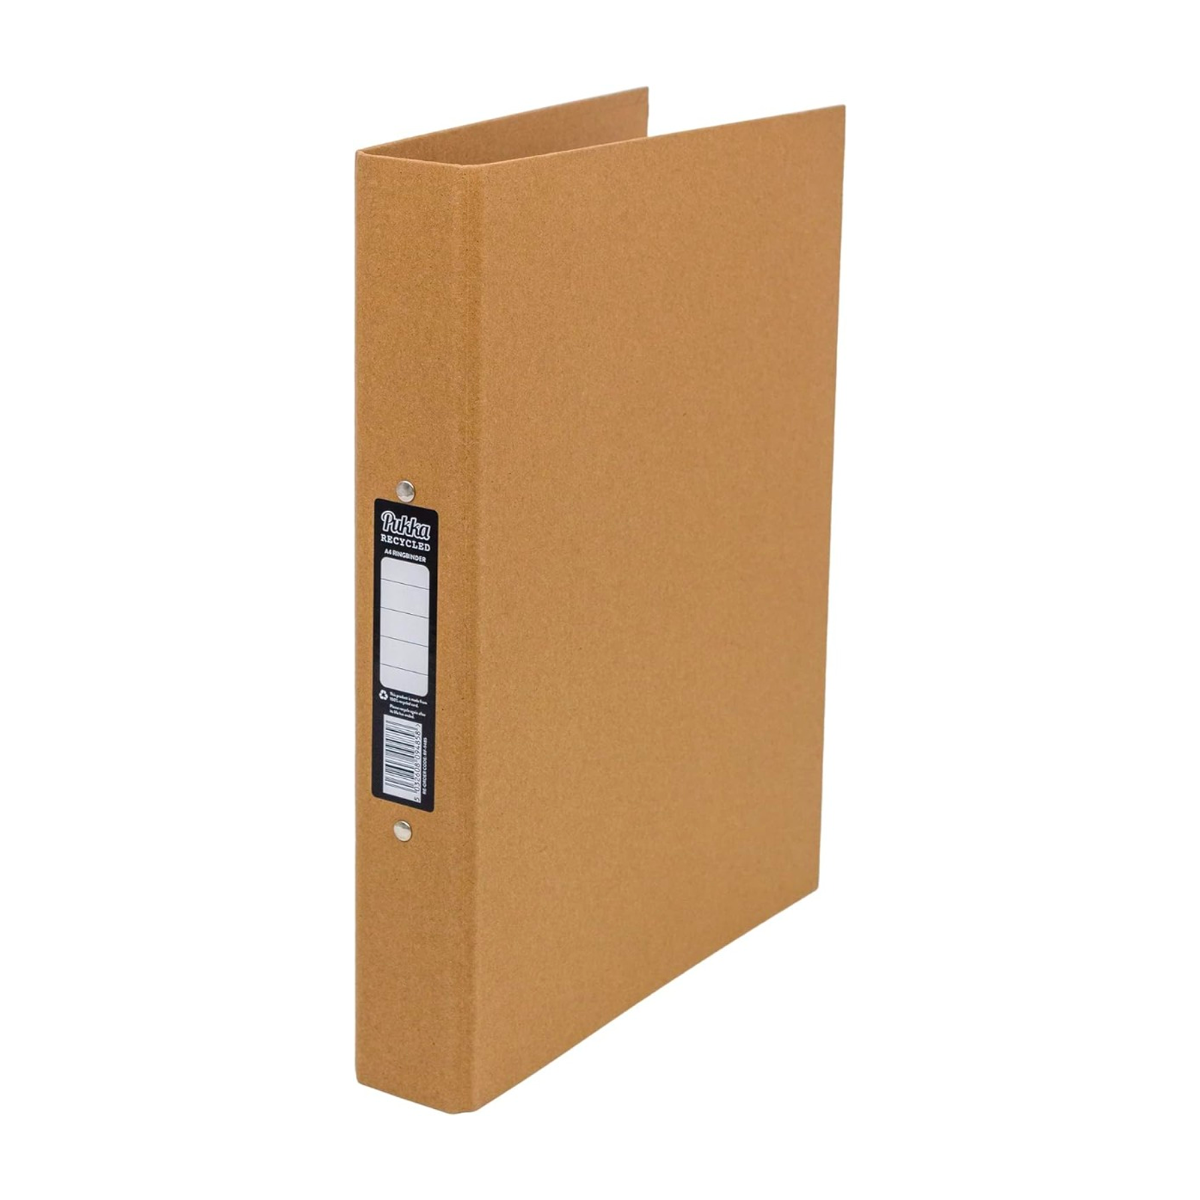 4-ring binder maX.file protect A4 assorted colours 3 pieces - Herlitz